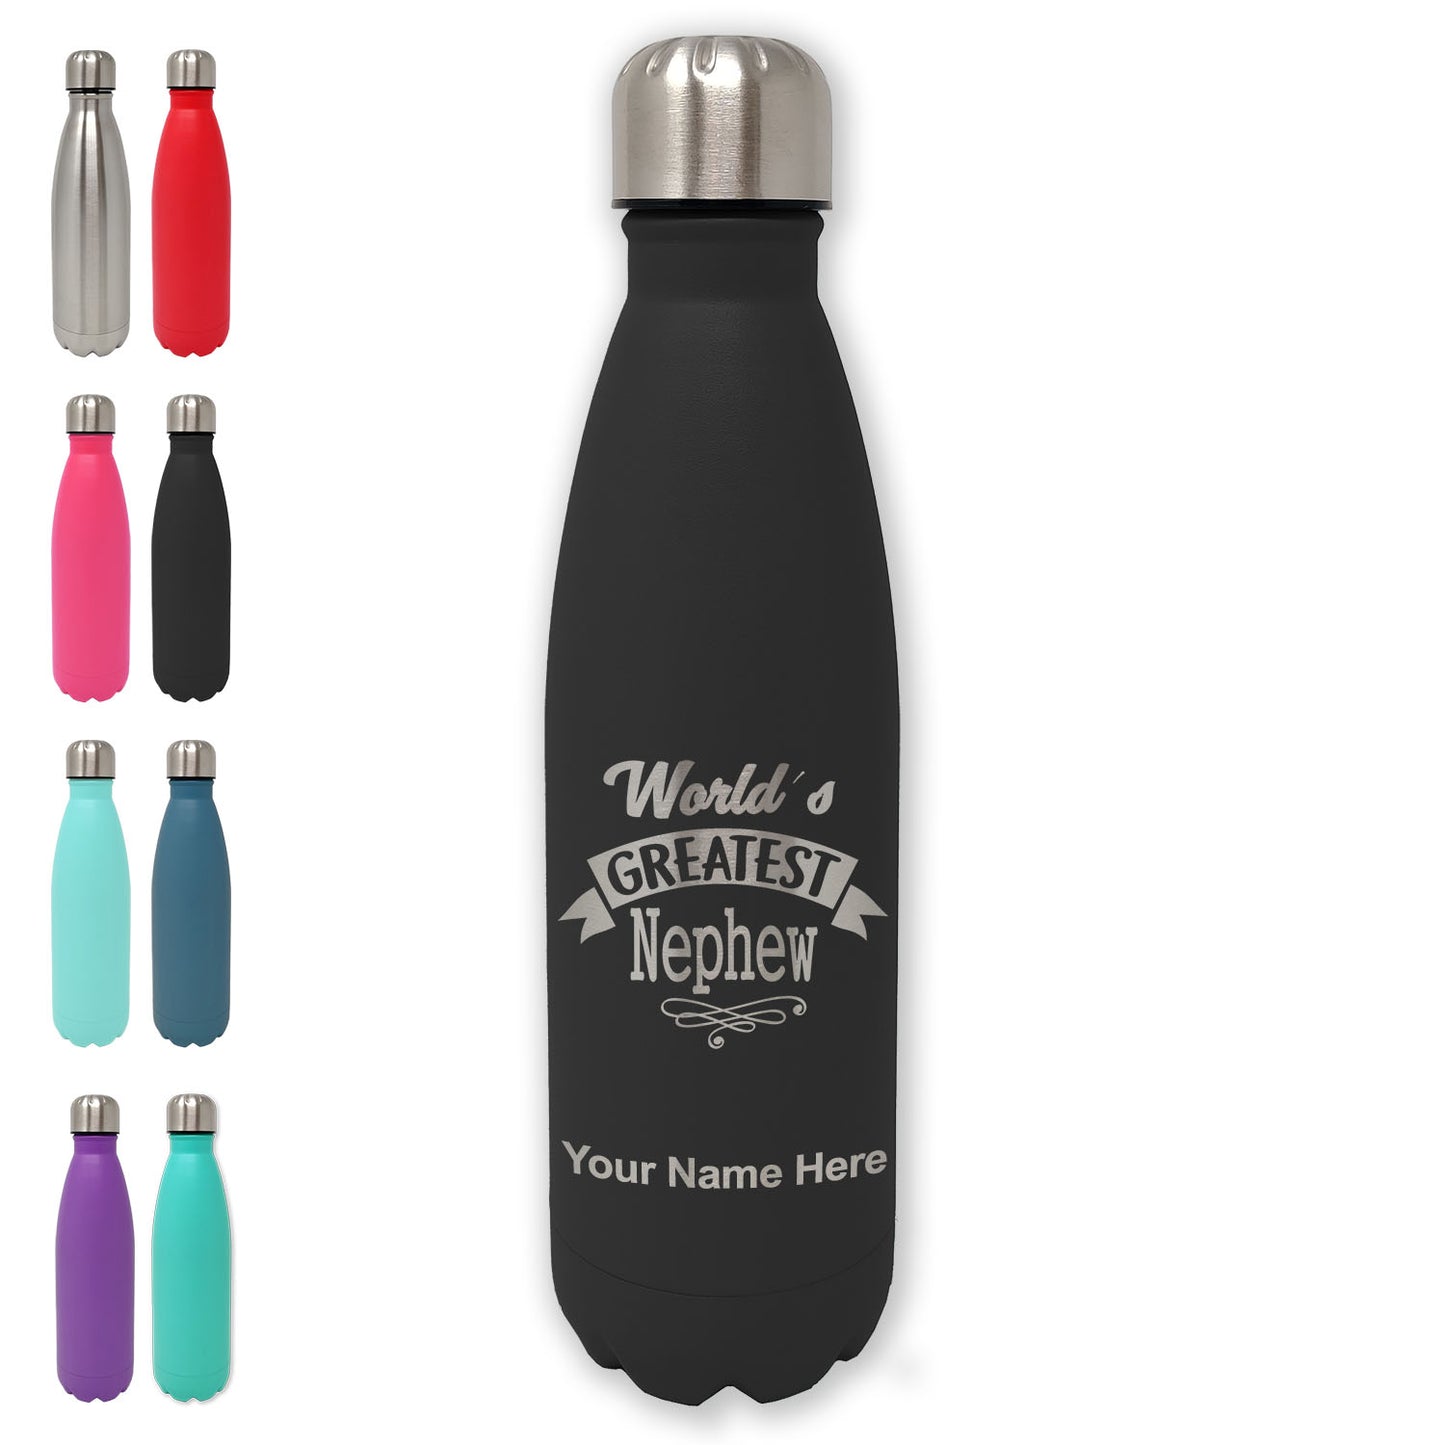 LaserGram Double Wall Water Bottle, World's Greatest Nephew, Personalized Engraving Included